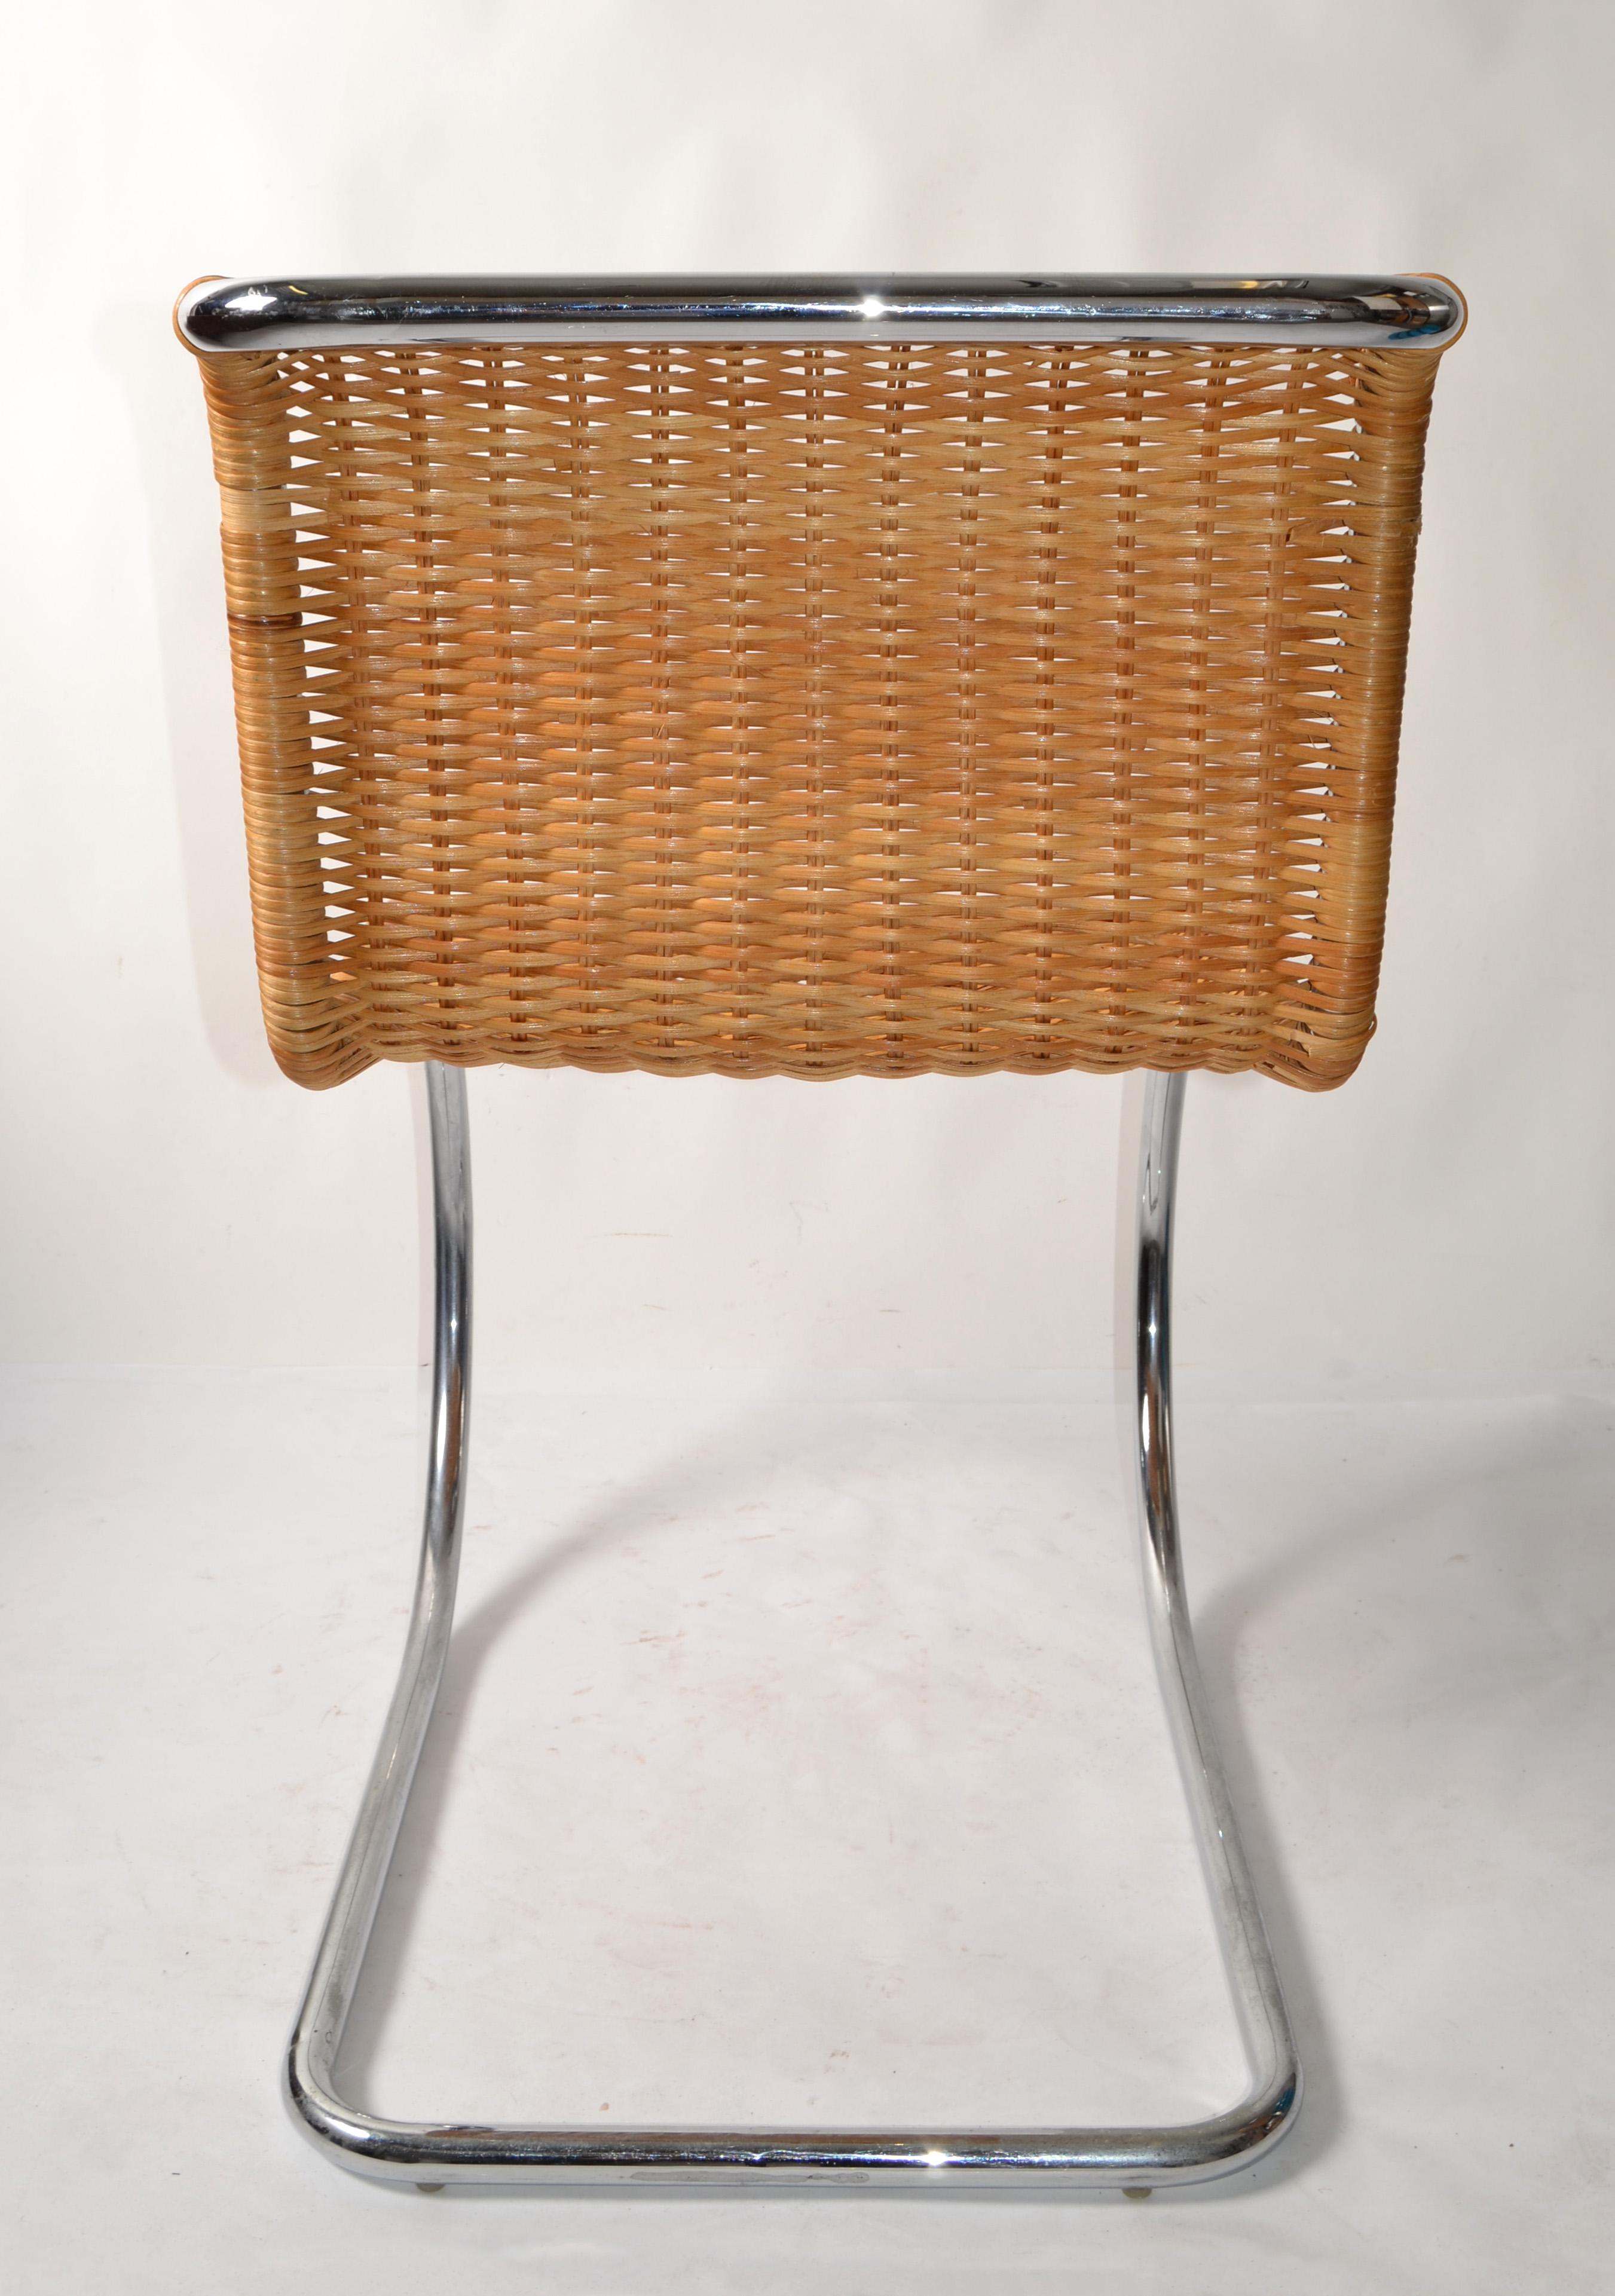 Tubular Ludwig Mies van der Rohe Attributed Mr Chair Armless Woven Cane Seat 70s For Sale 2